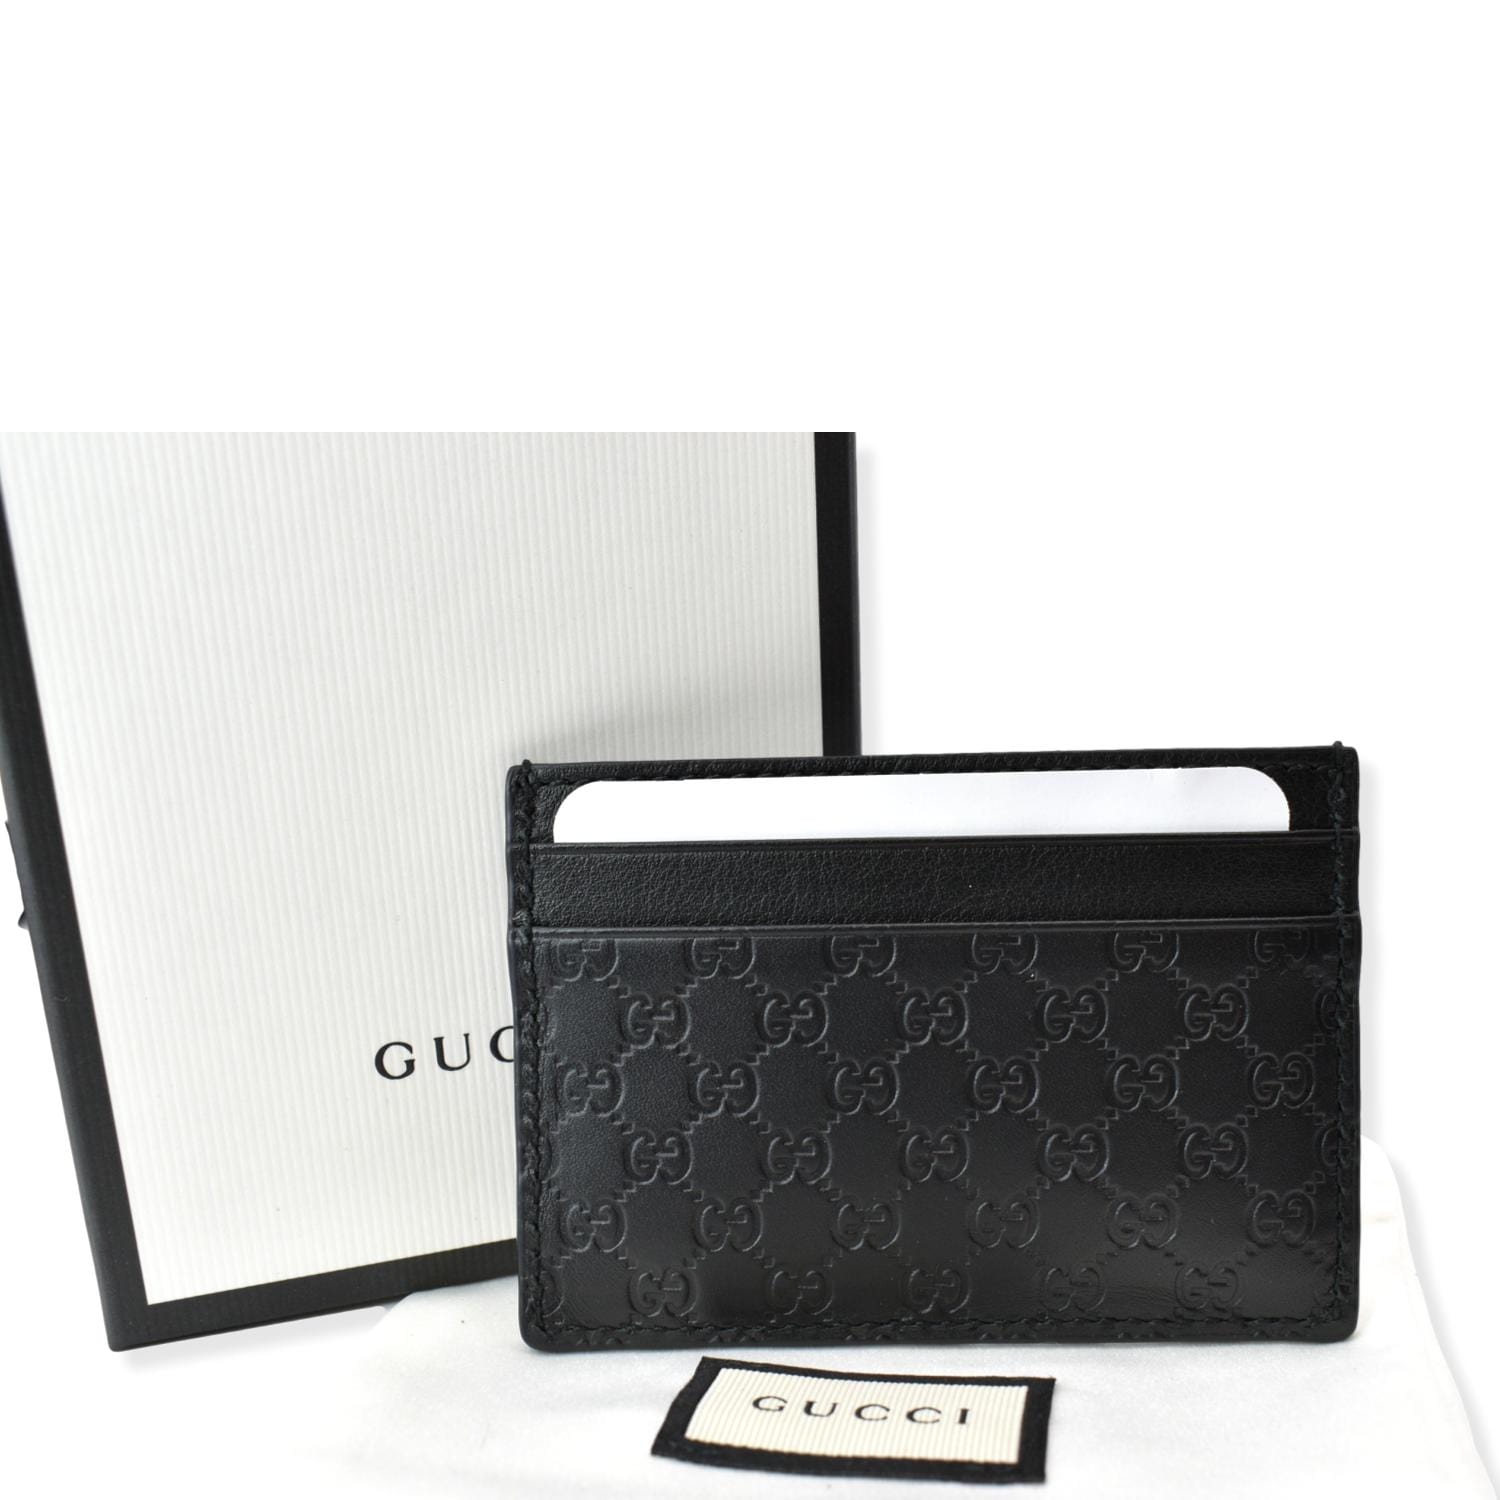 BRAND NEW Authentic Gucci Just Released Belt Storage Box + Dust Bag Gift  Set